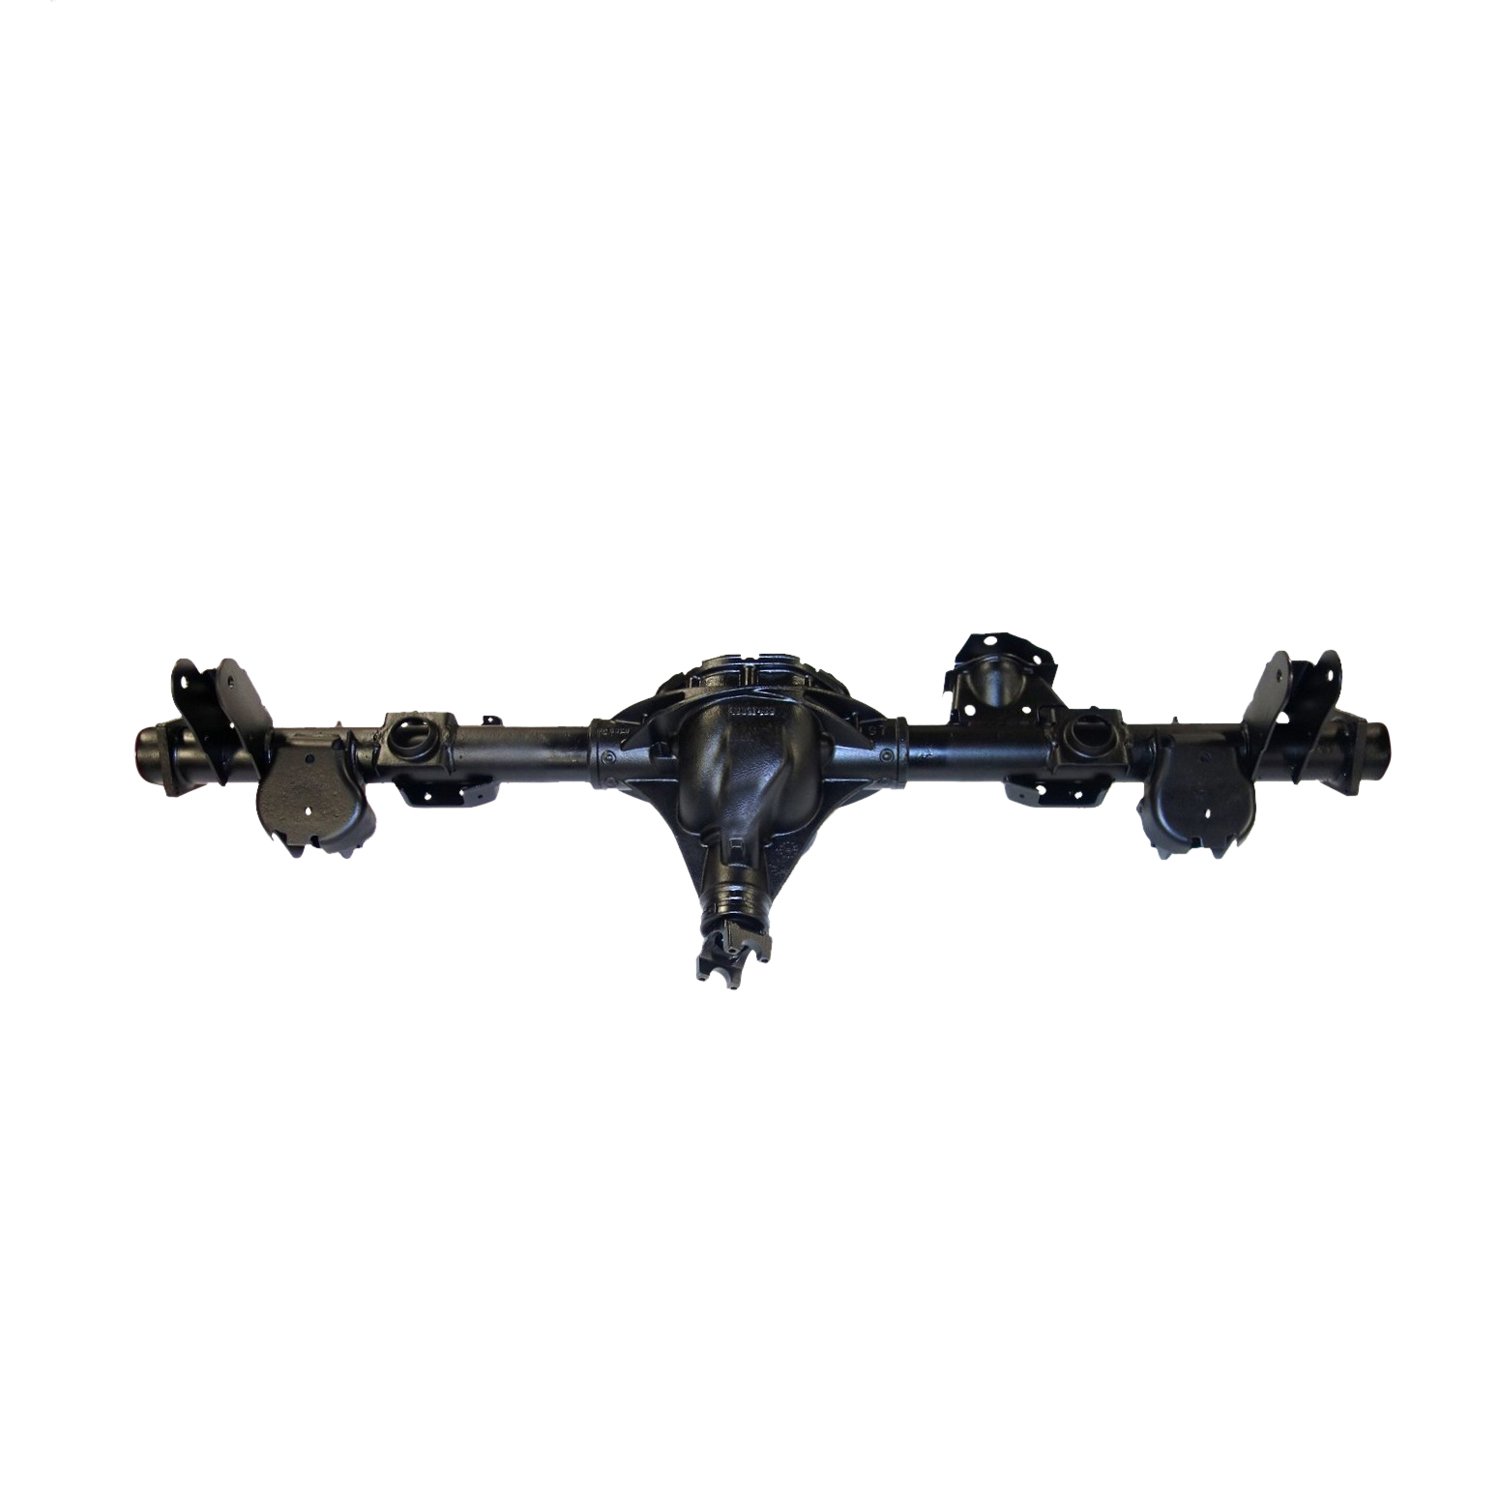 Remanufactured Axle Assembly for GM 8.6" 2007-08 GM Suburban 1500, 3.73 Rato, Posi